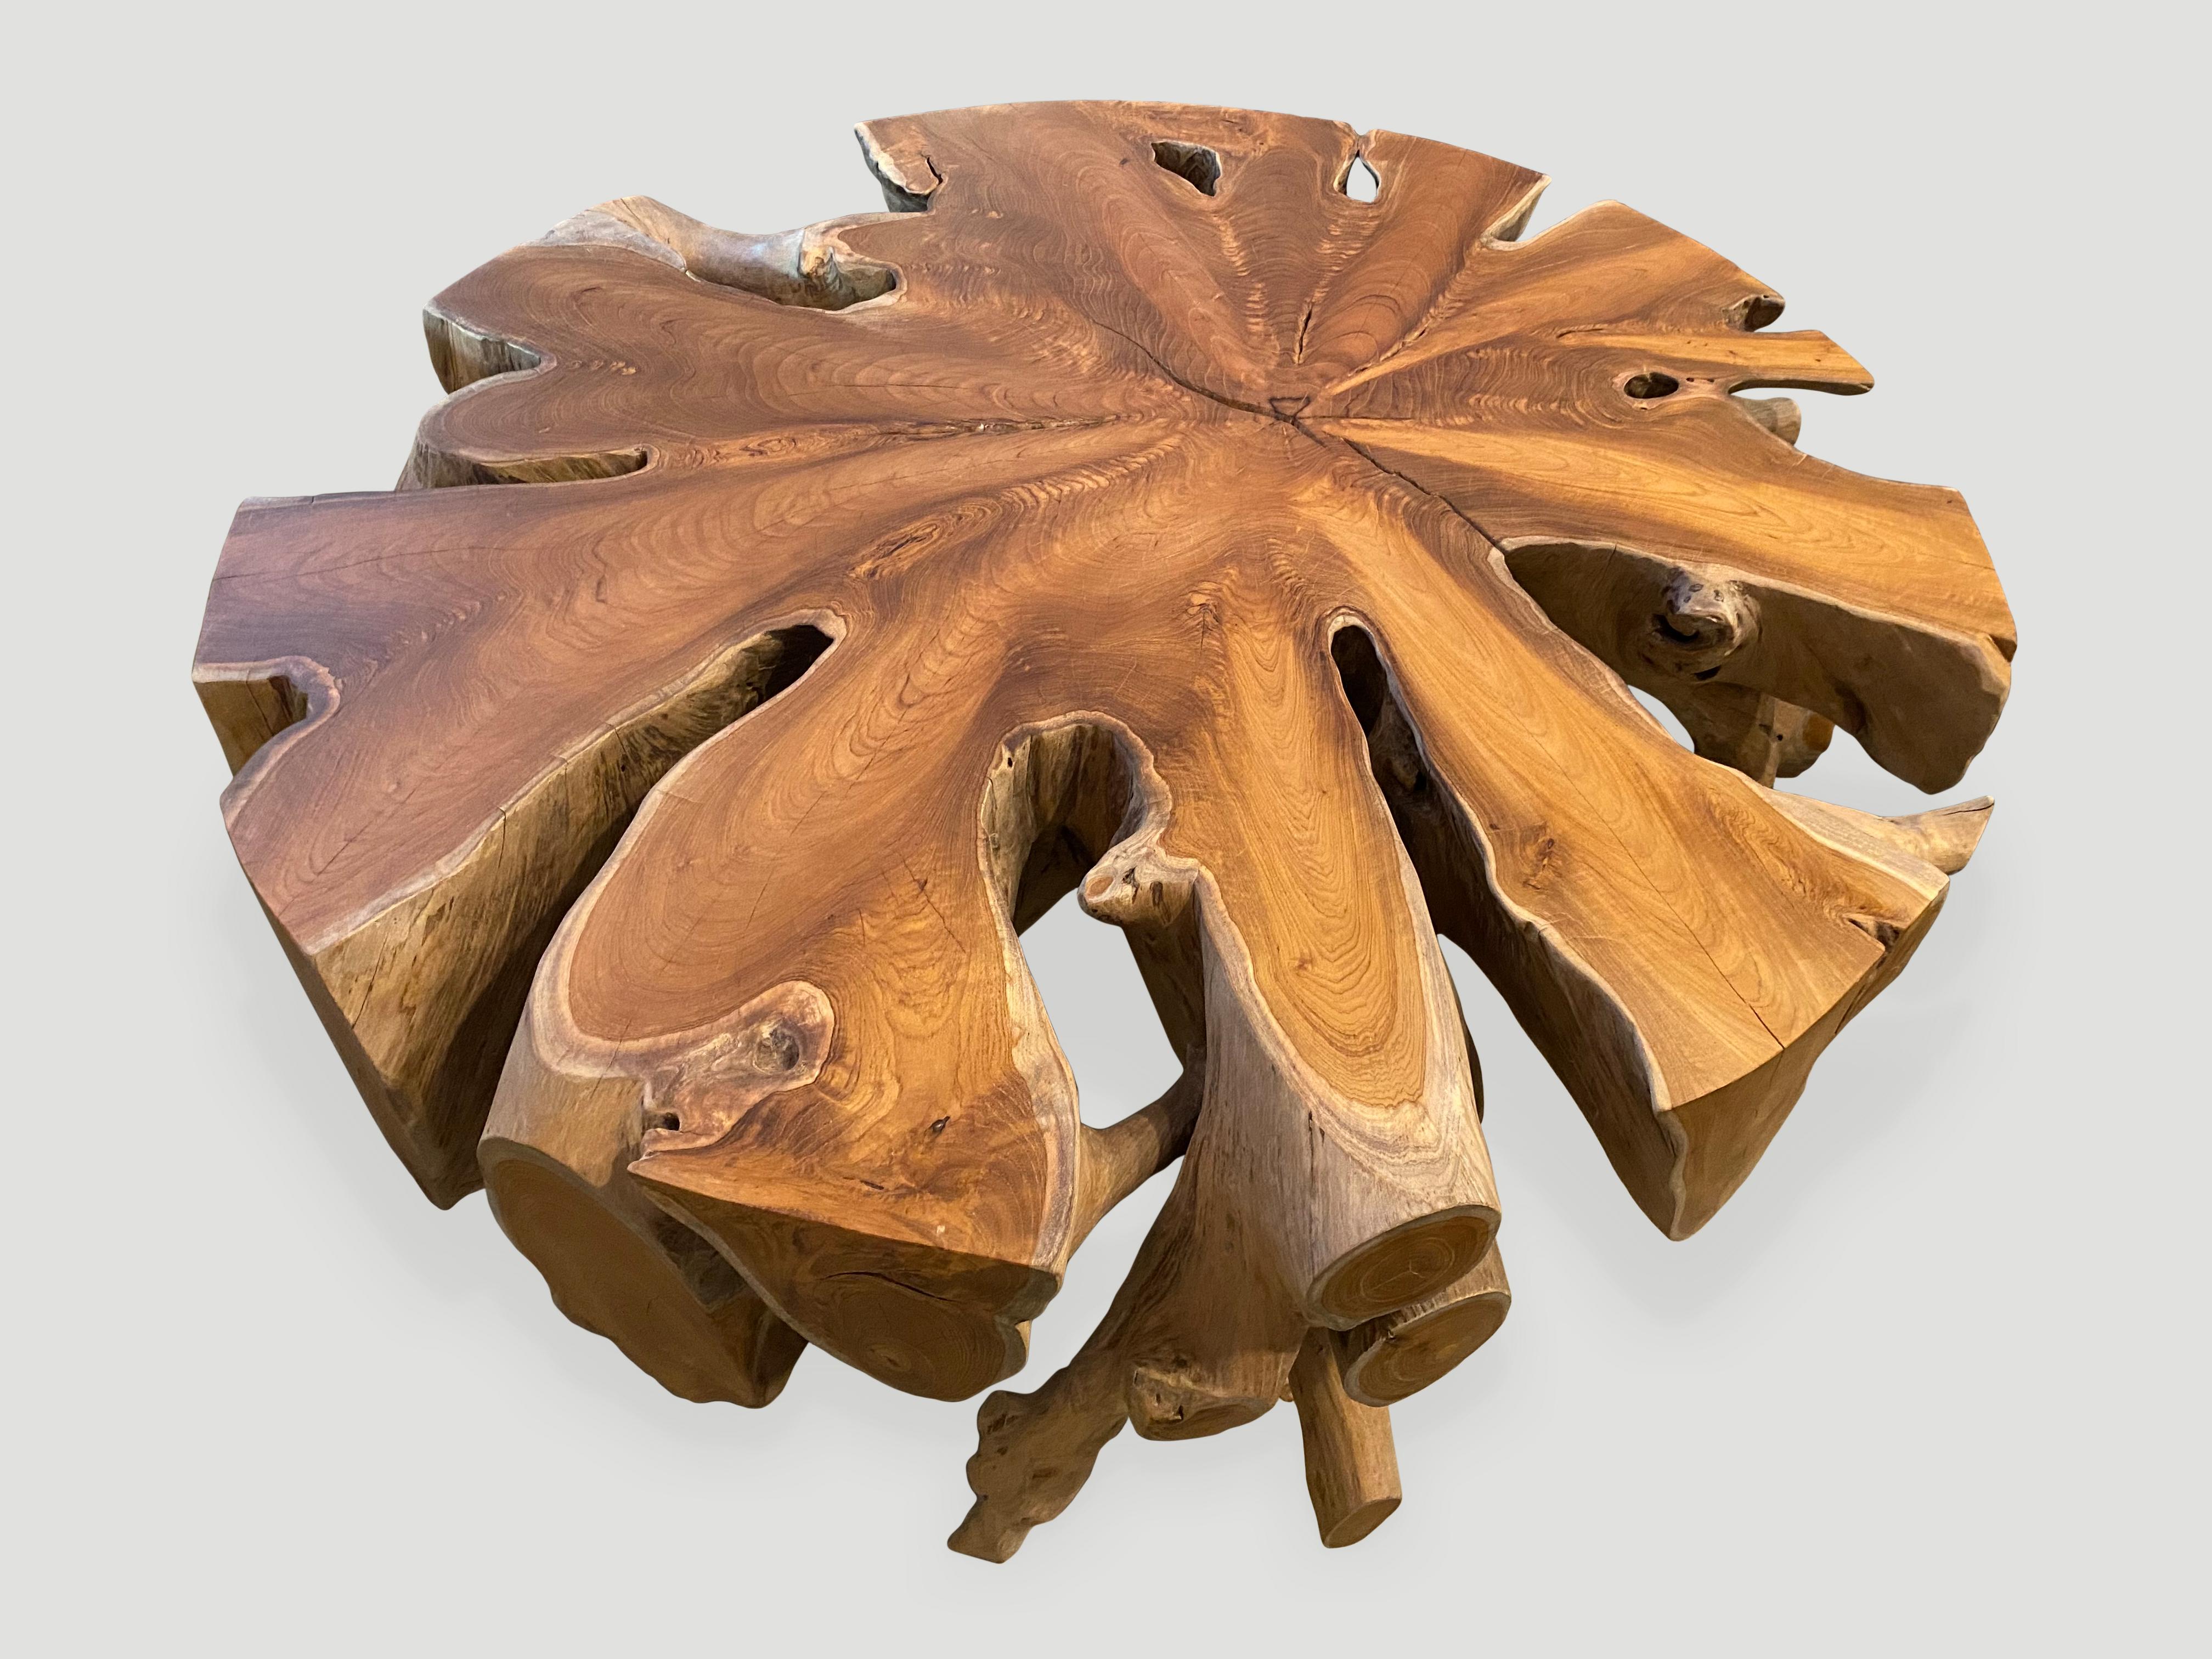 Reclaimed teak root coffee table. Hand carved into this beautiful usable shape whilst respecting the natural organic wood. We polished the aged teak with a natural oil finish expositing the beautiful grain in the wood. Organic is the new modern.